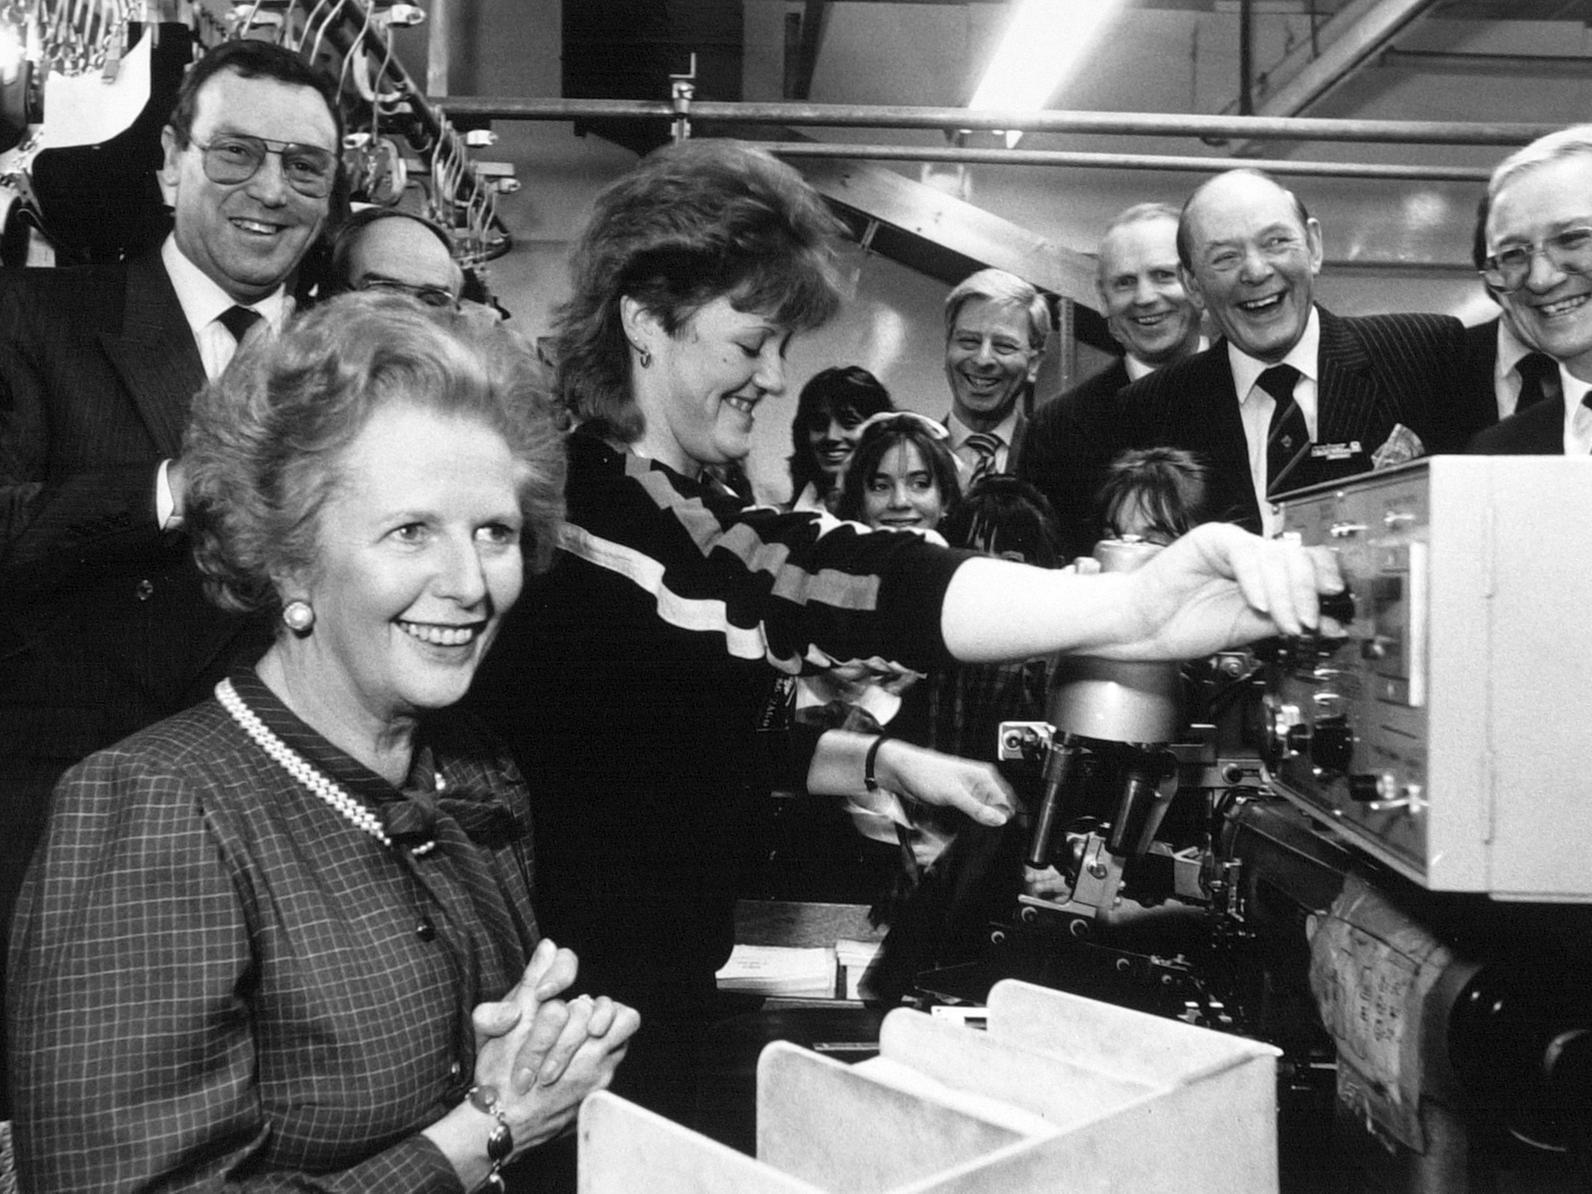 Prime Minister Margaret Thatcher visited Centaur Clothes on Great George Street. She is pictured with machinist Karen Pheasby.